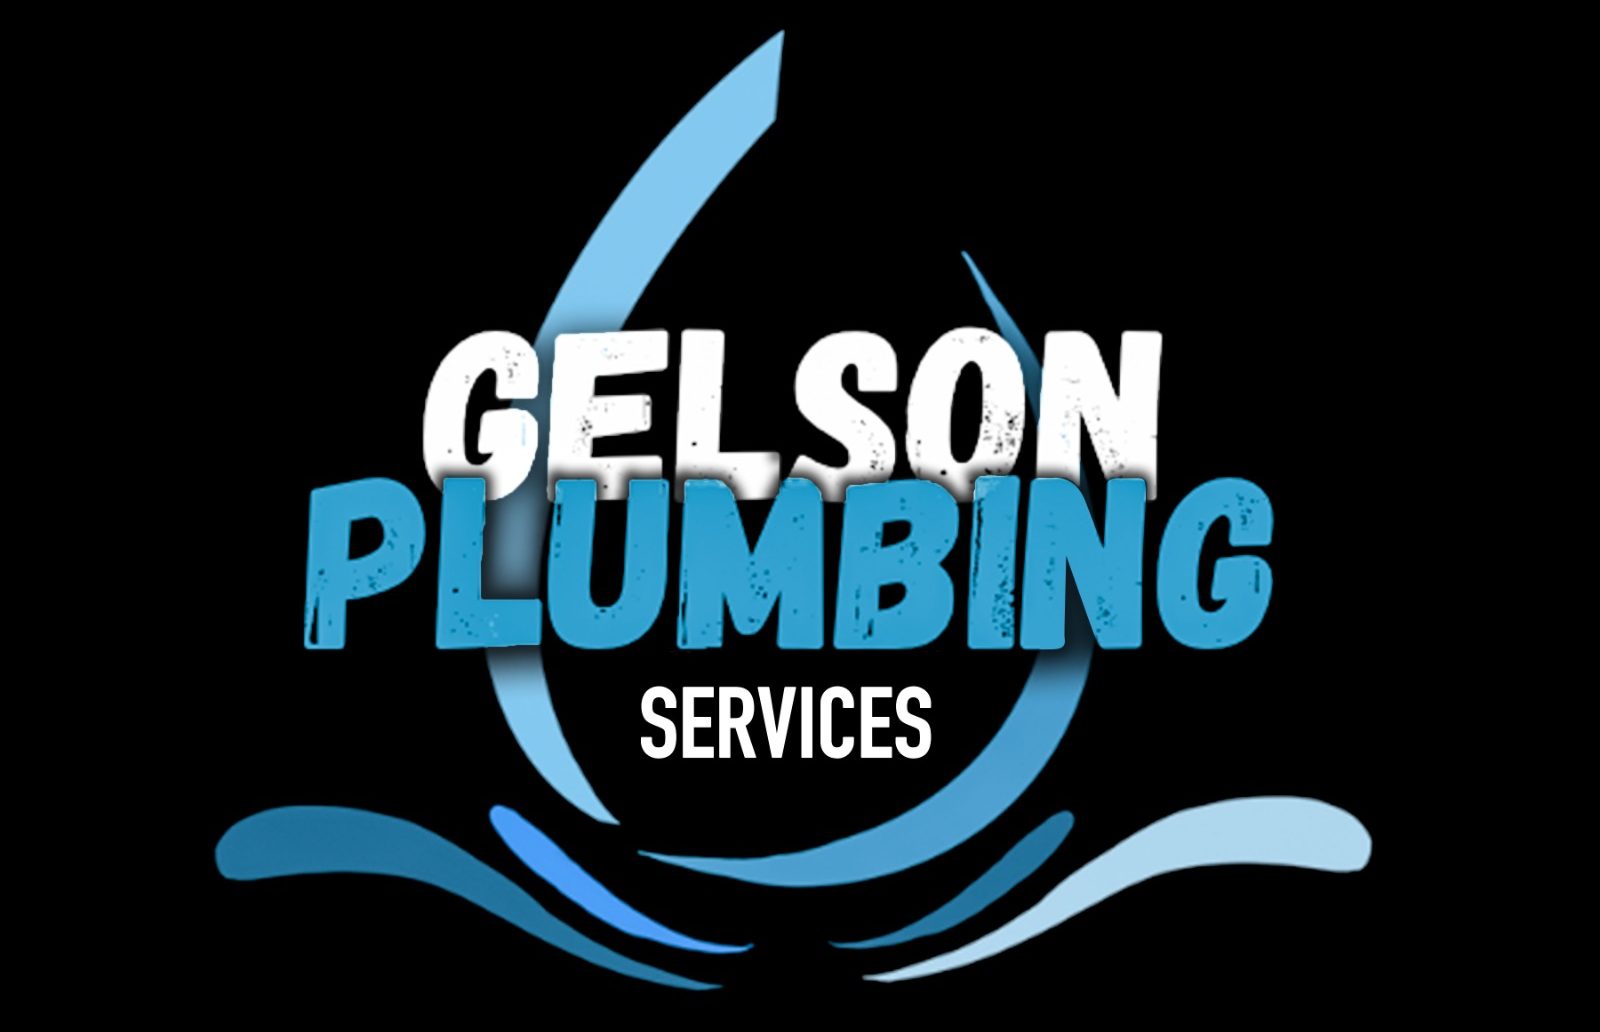 Gelson Plumbing Services